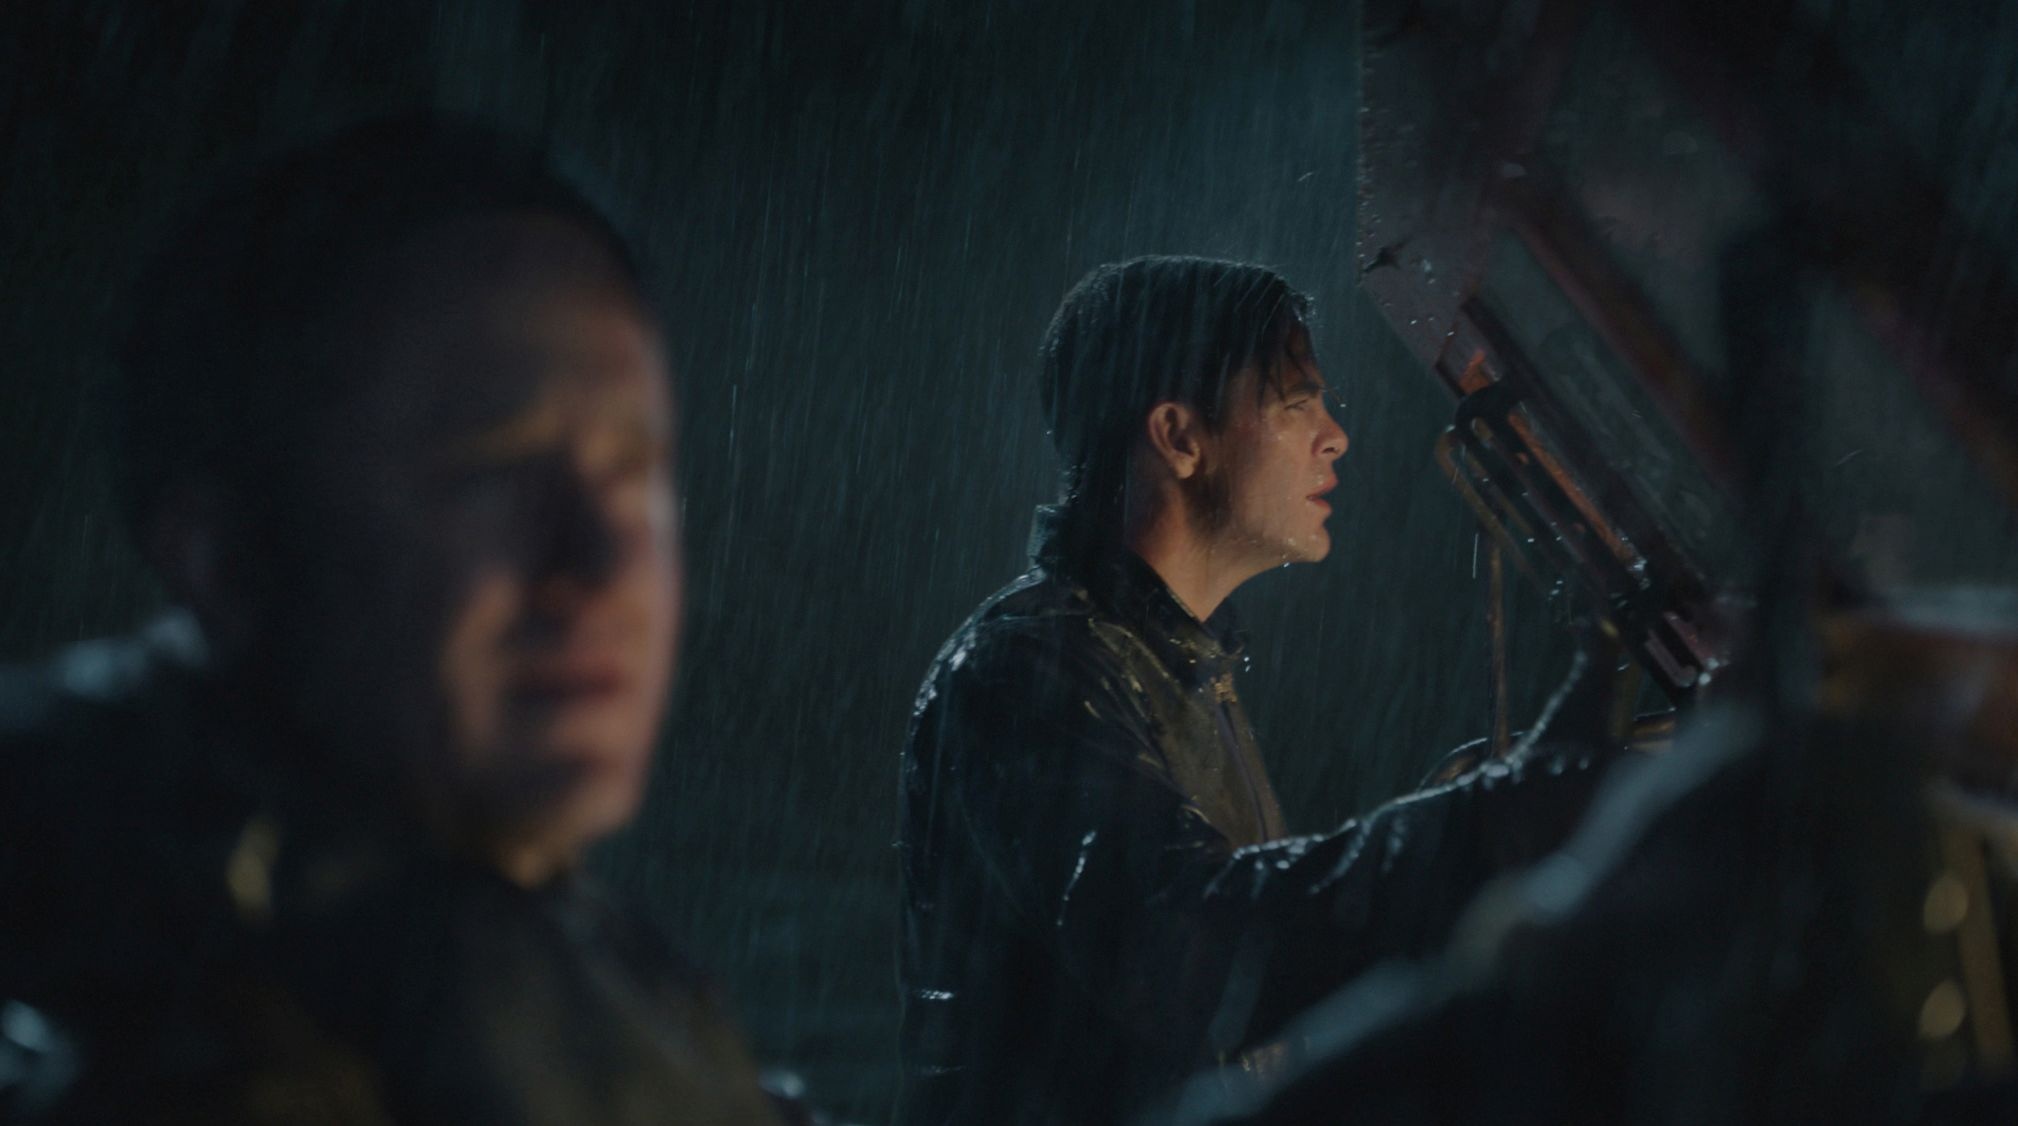 The Finest Hours, Every movie has a lesson, Movie review, 2020x1130 HD Desktop